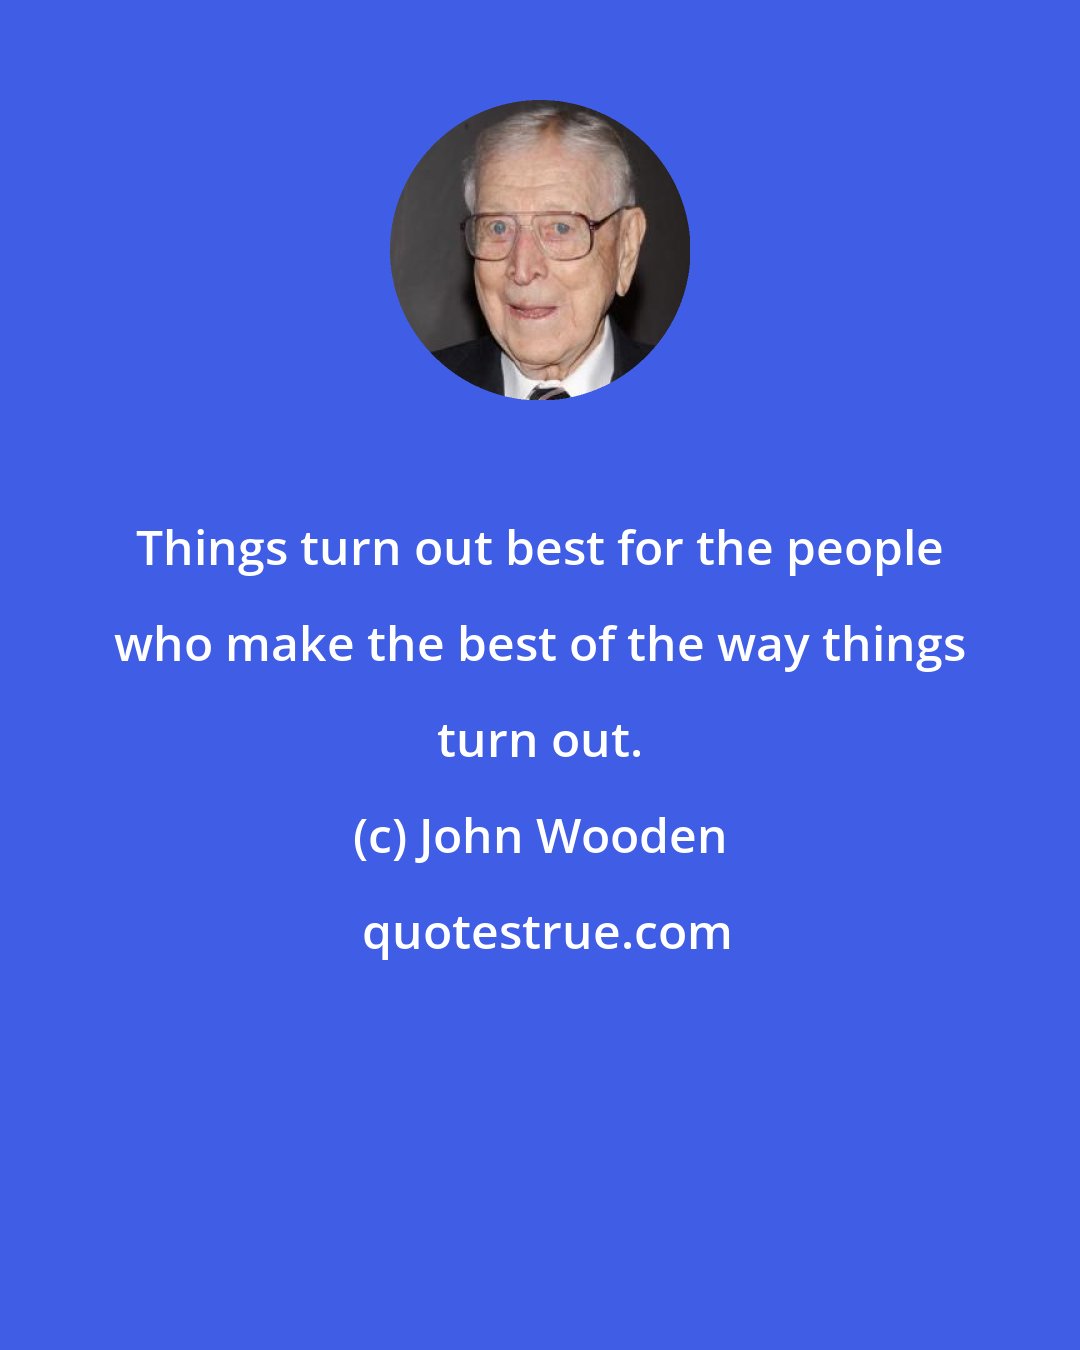 John Wooden: Things turn out best for the people who make the best of the way things turn out.